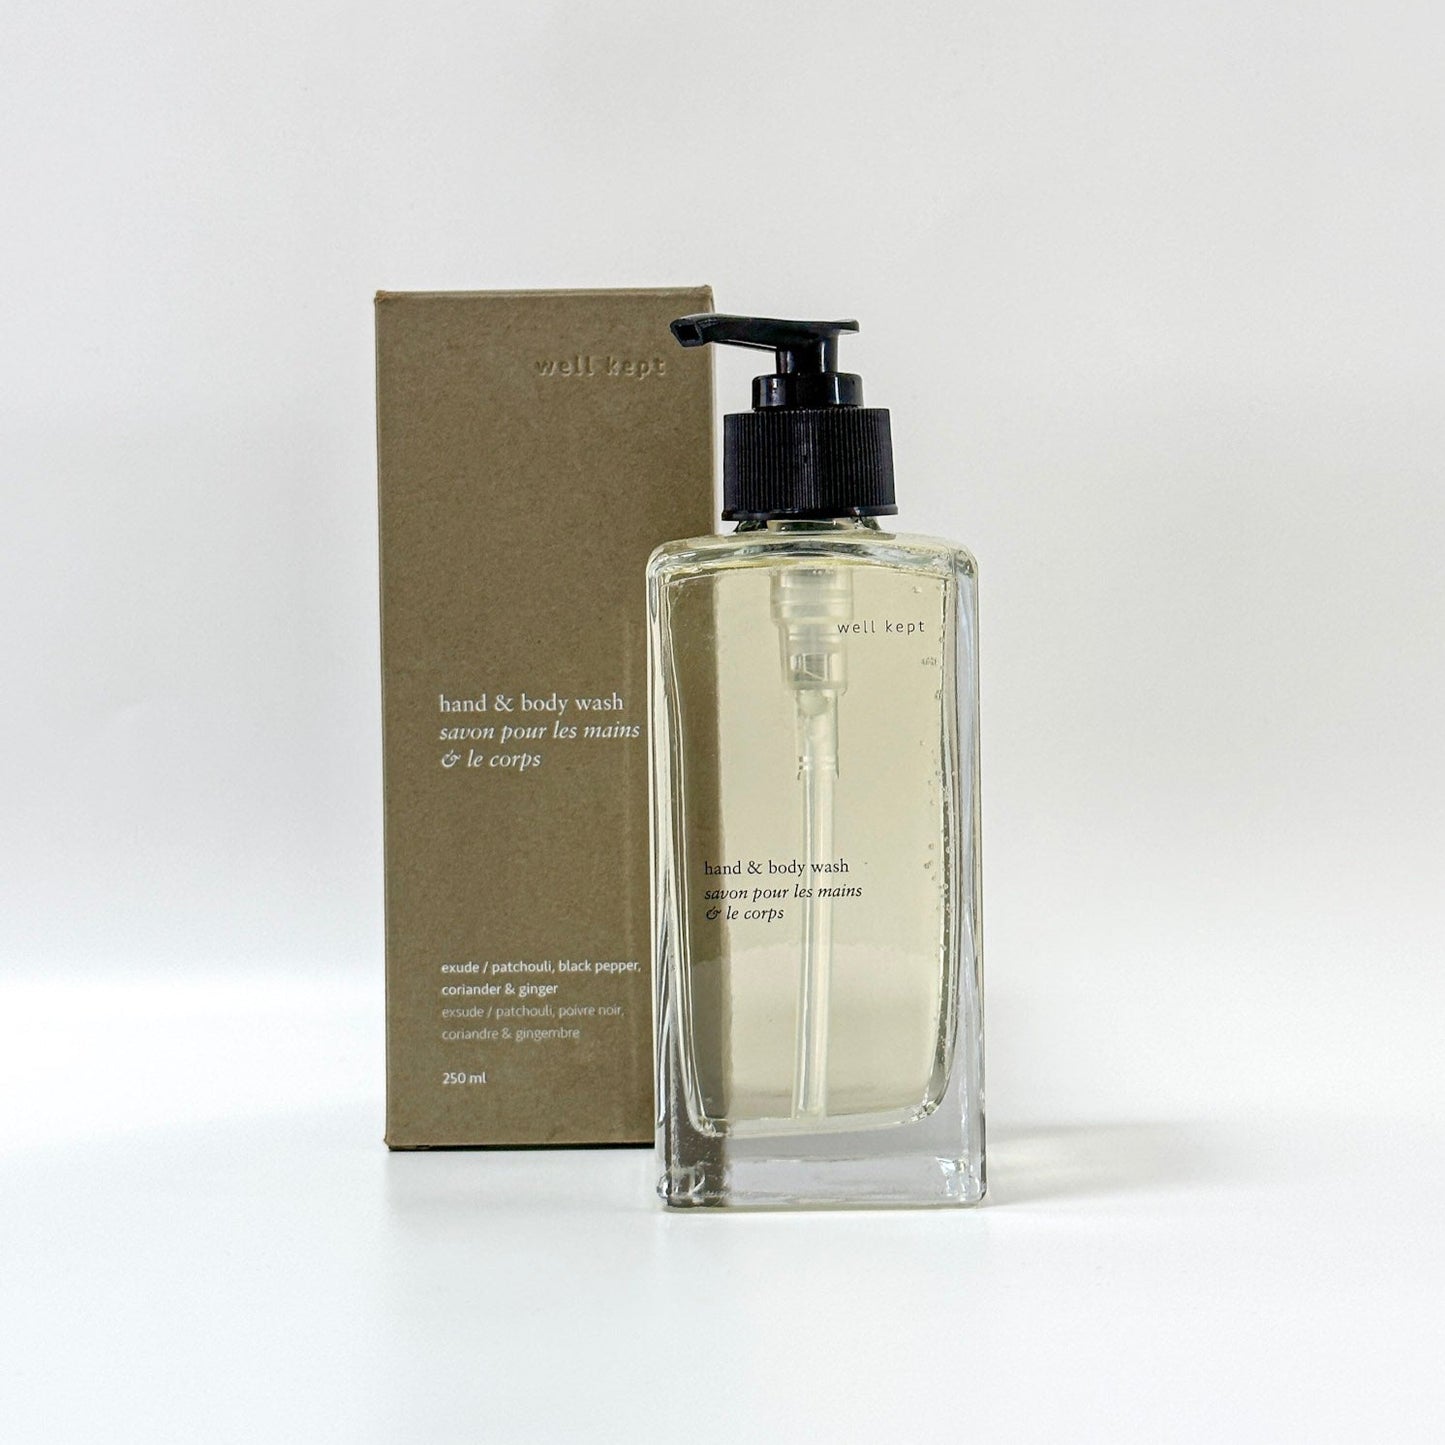 Well Kept - Exude Hand & Body Wash